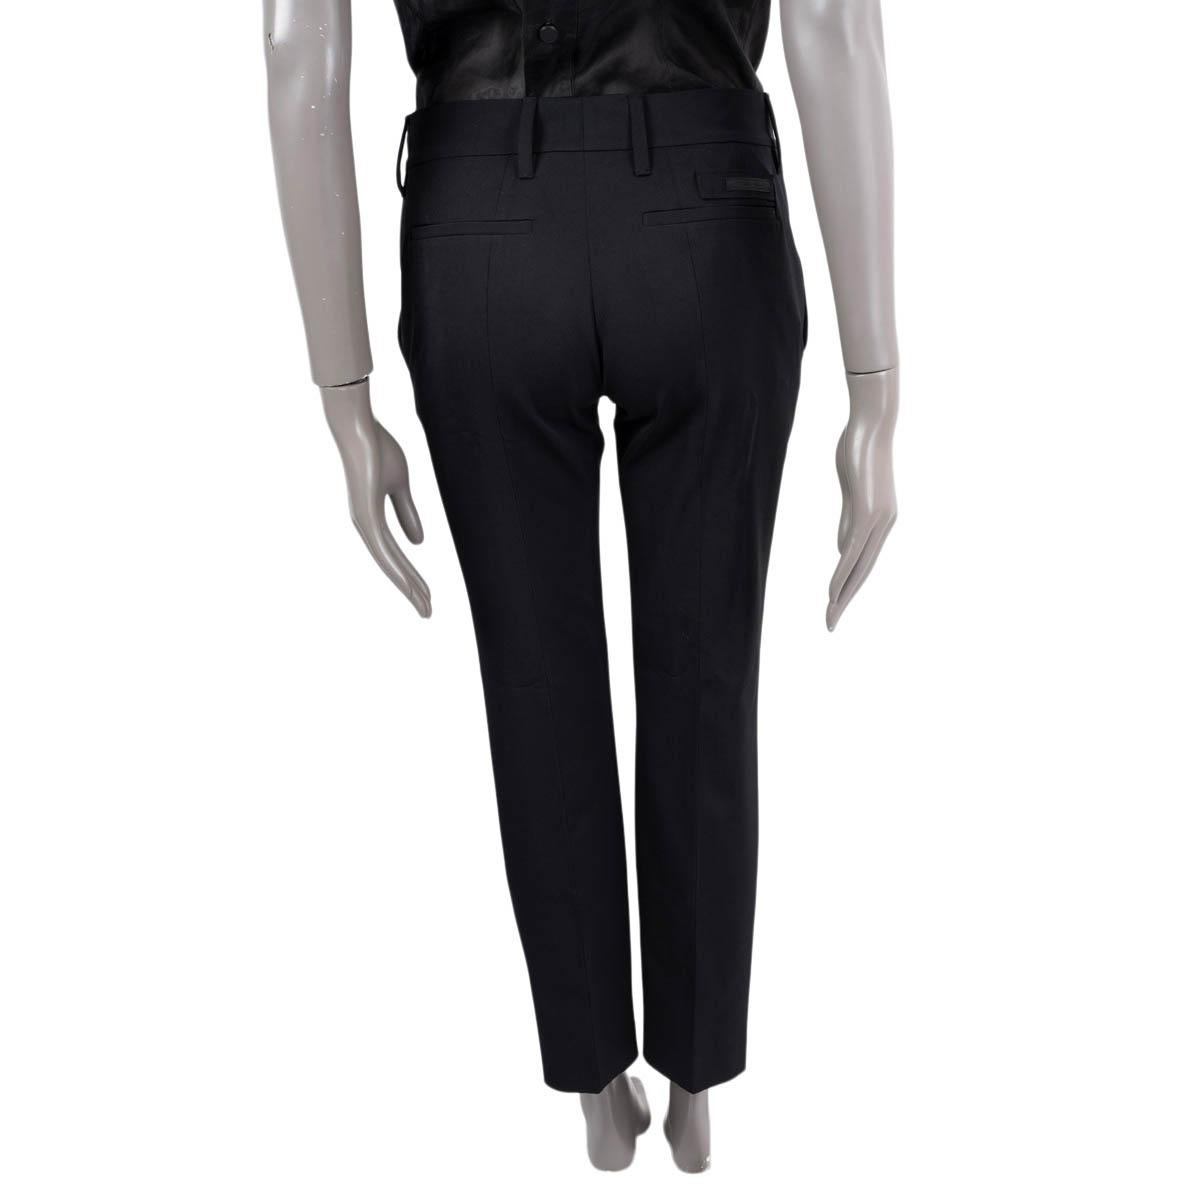 Black PRADA black Technical Stretch Fabric TAPERED Pants 38 XS For Sale